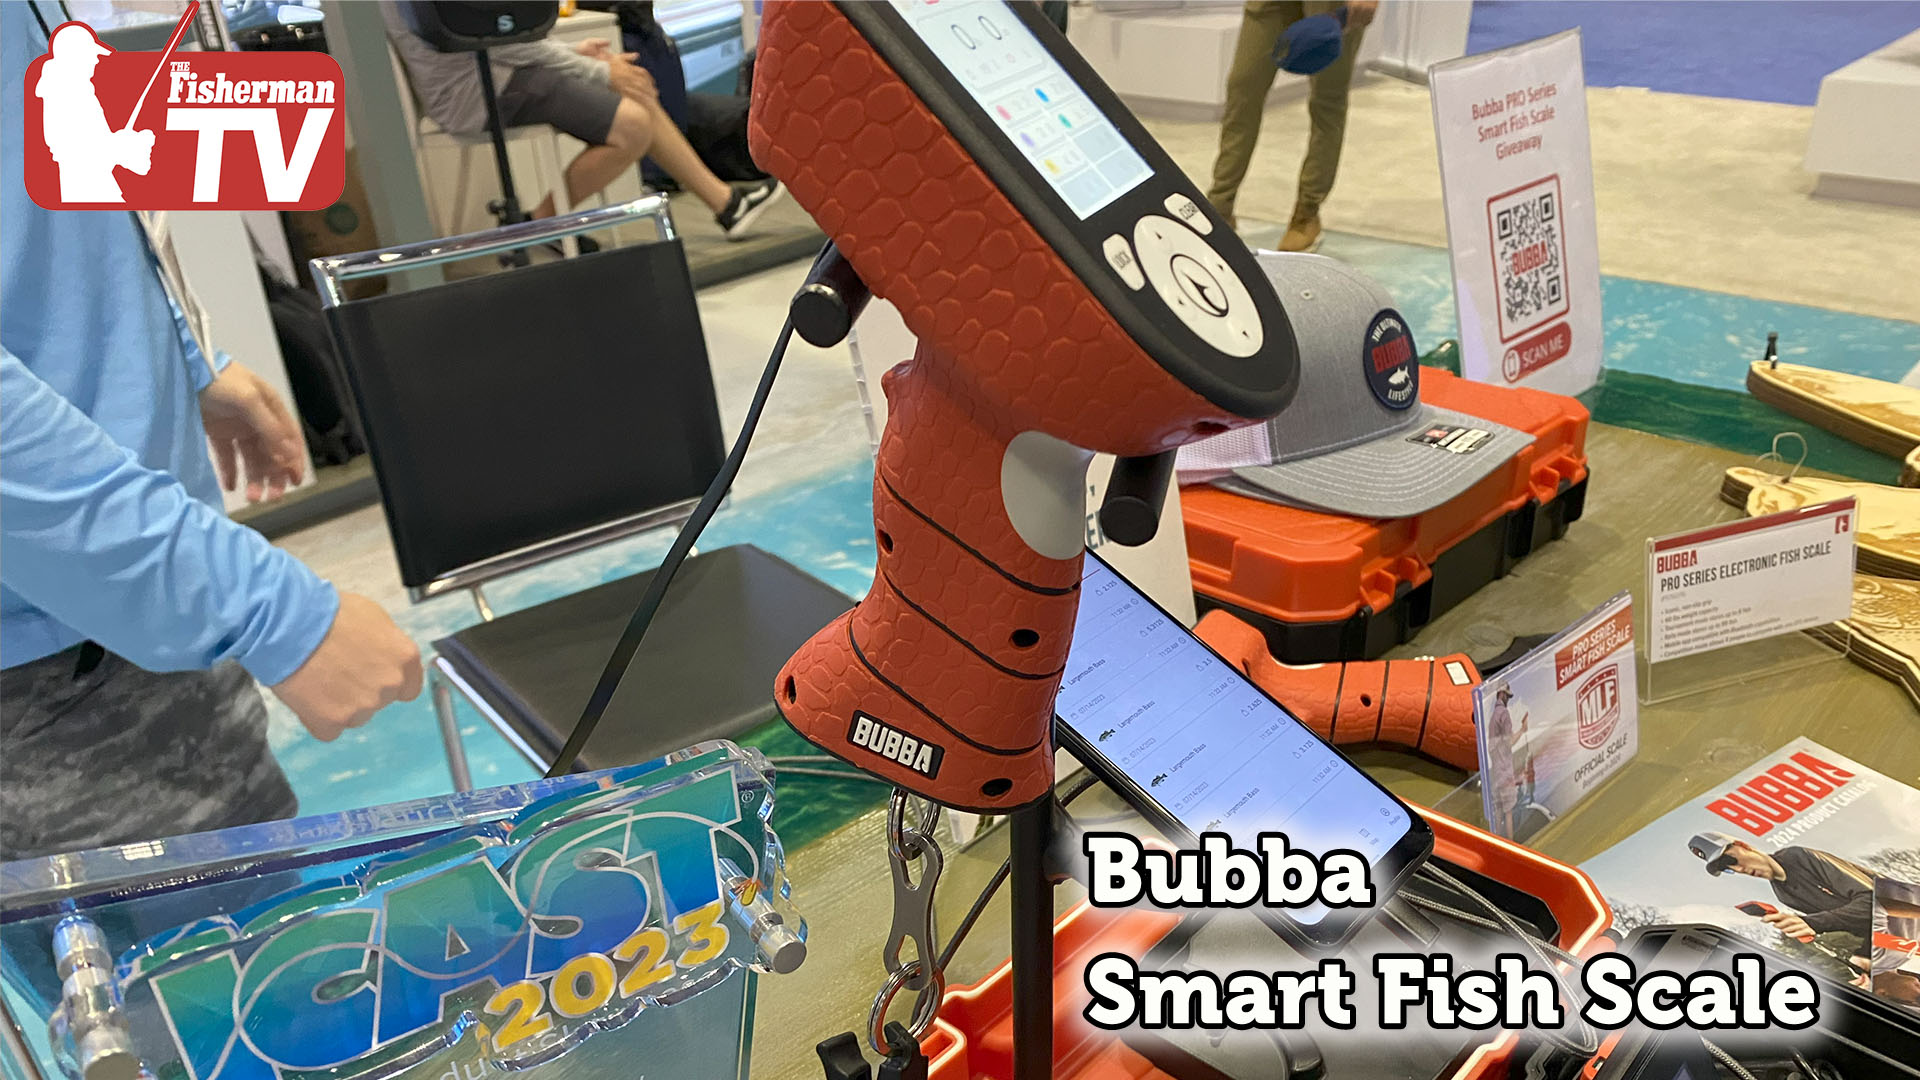 ICAST New Product Review- Bubba Pro Series Smart Fish Scale - The Fisherman